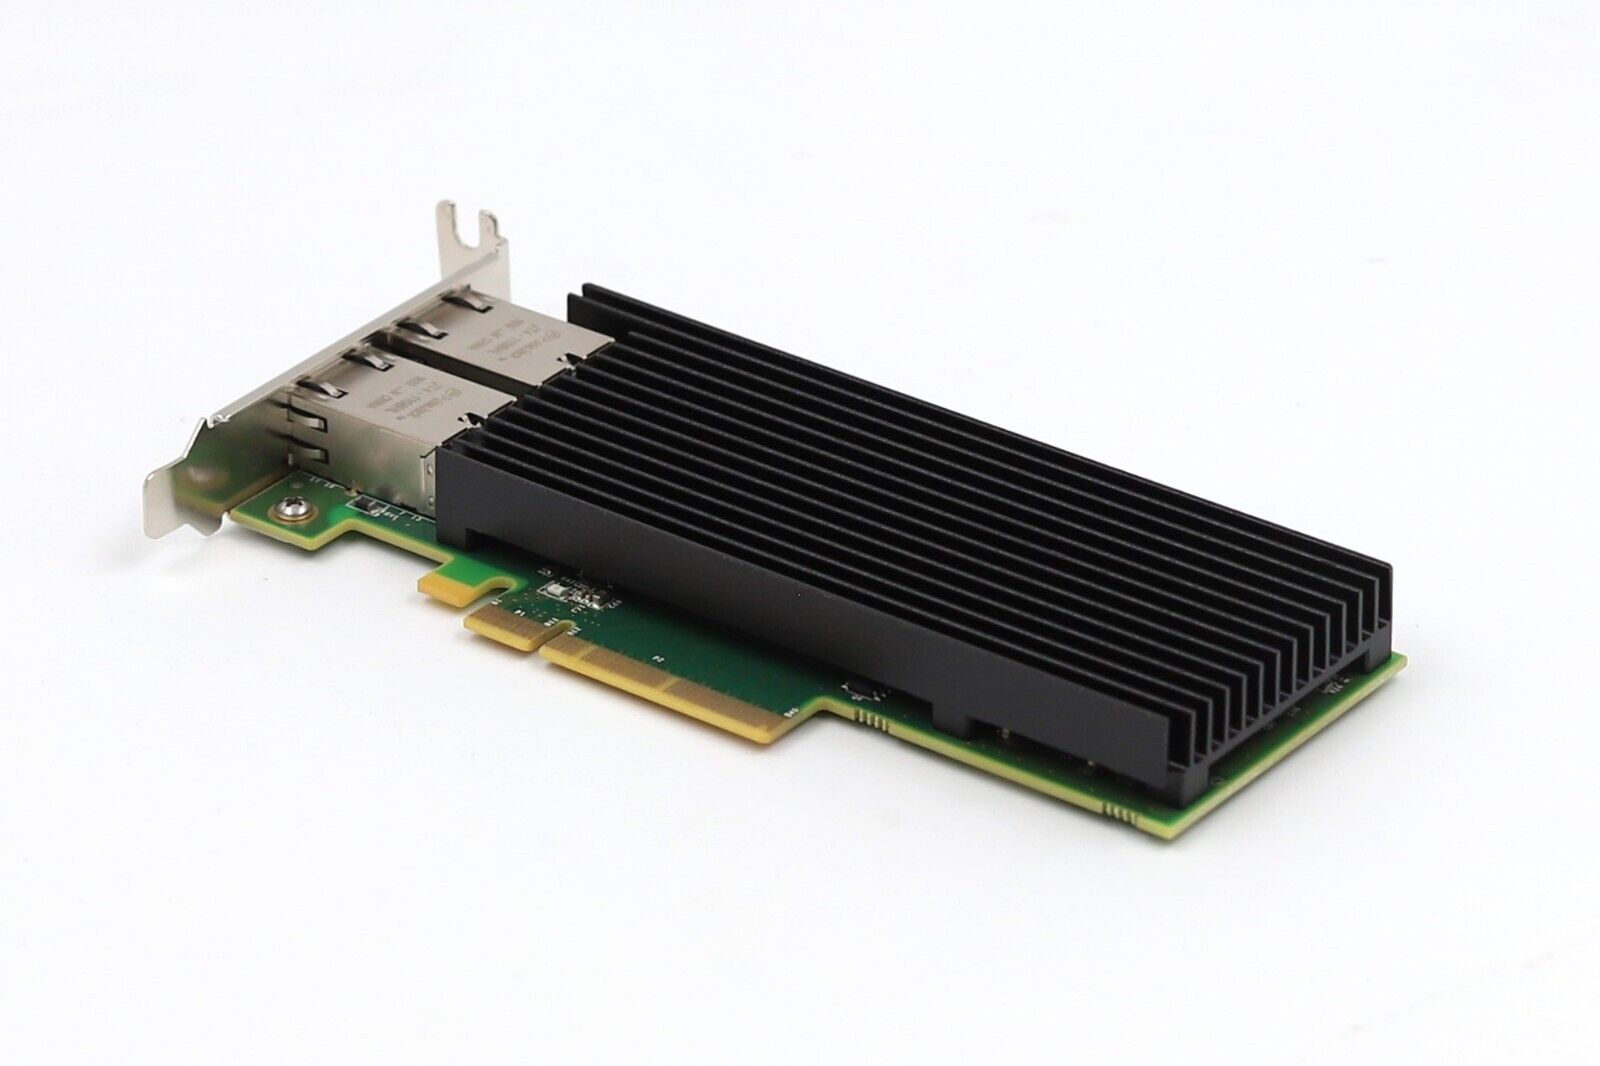 Silicom Dual-Port 10GbE Ethernet PCIe Network Server Adapter P/N: PE210G2I40-T